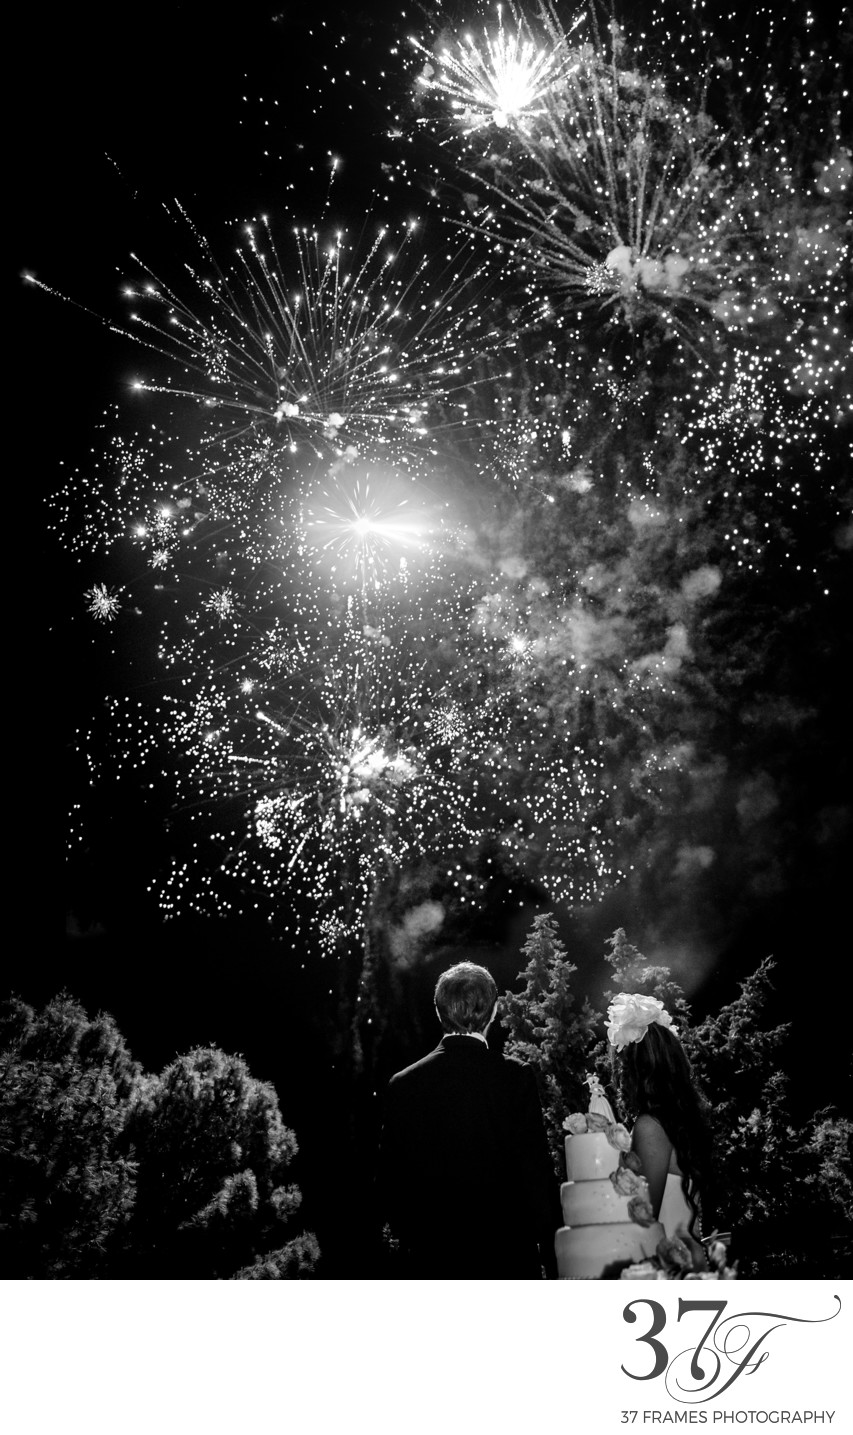 Fireworks at Armani Wedding in Italy